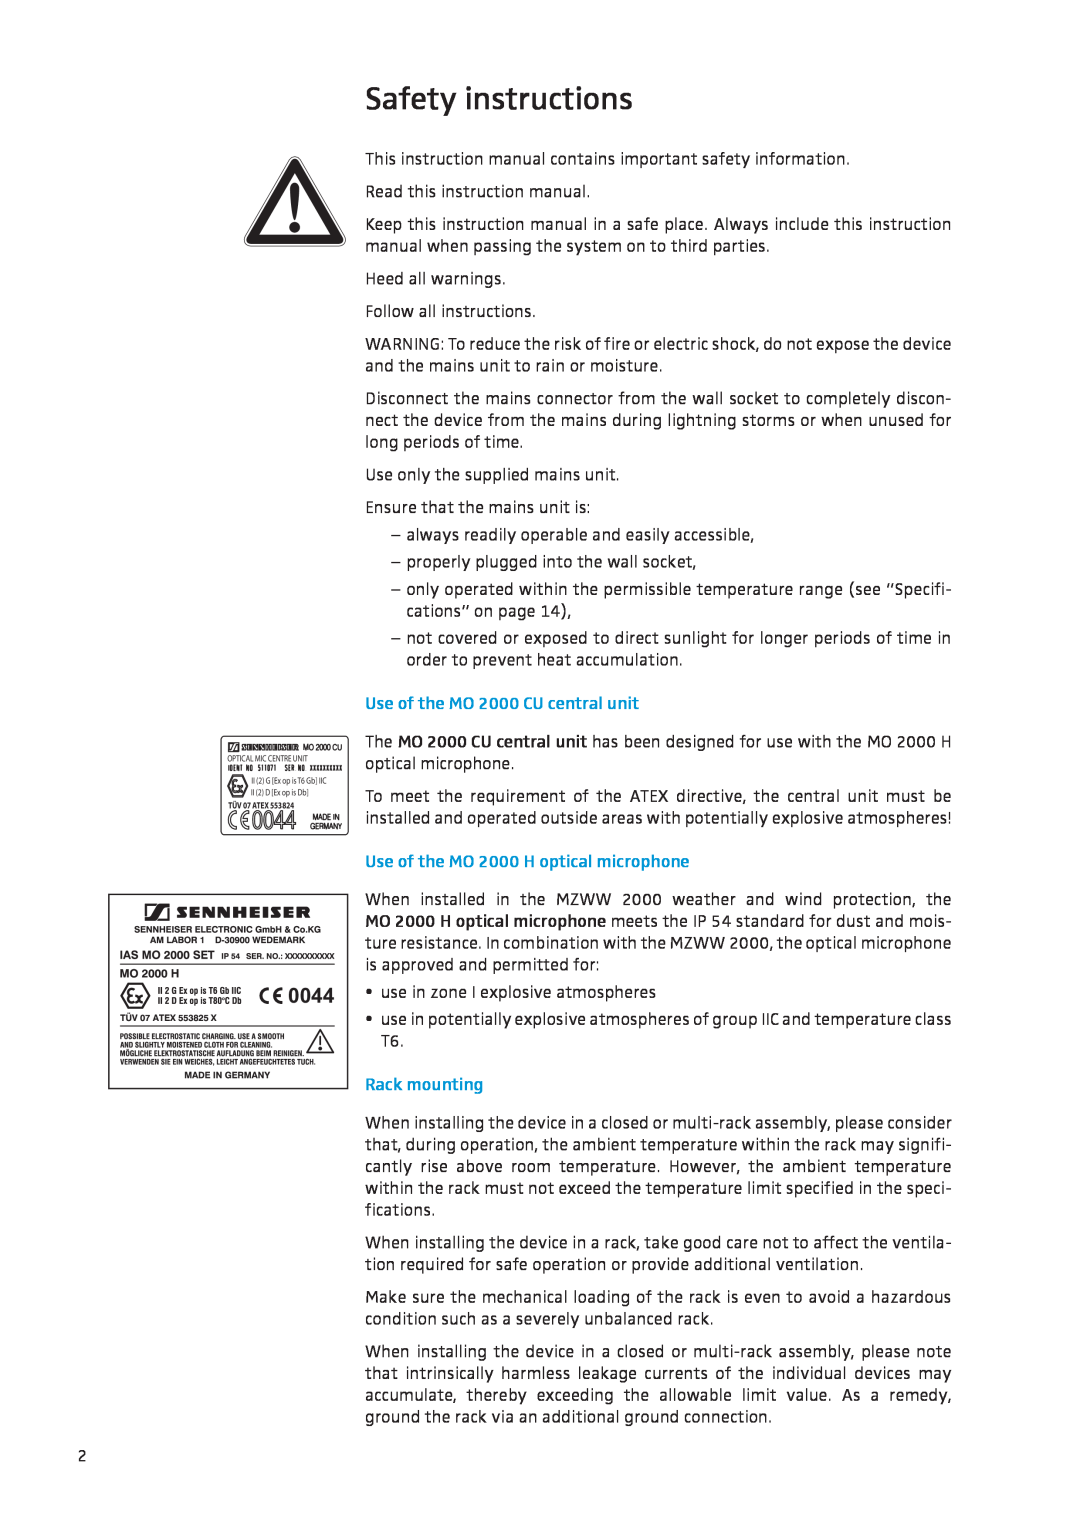 Sennheiser IAS-MO 2000 Safety instructions, Use of the MO 2000 CU central unit, Use of the MO 2000 H optical microphone 